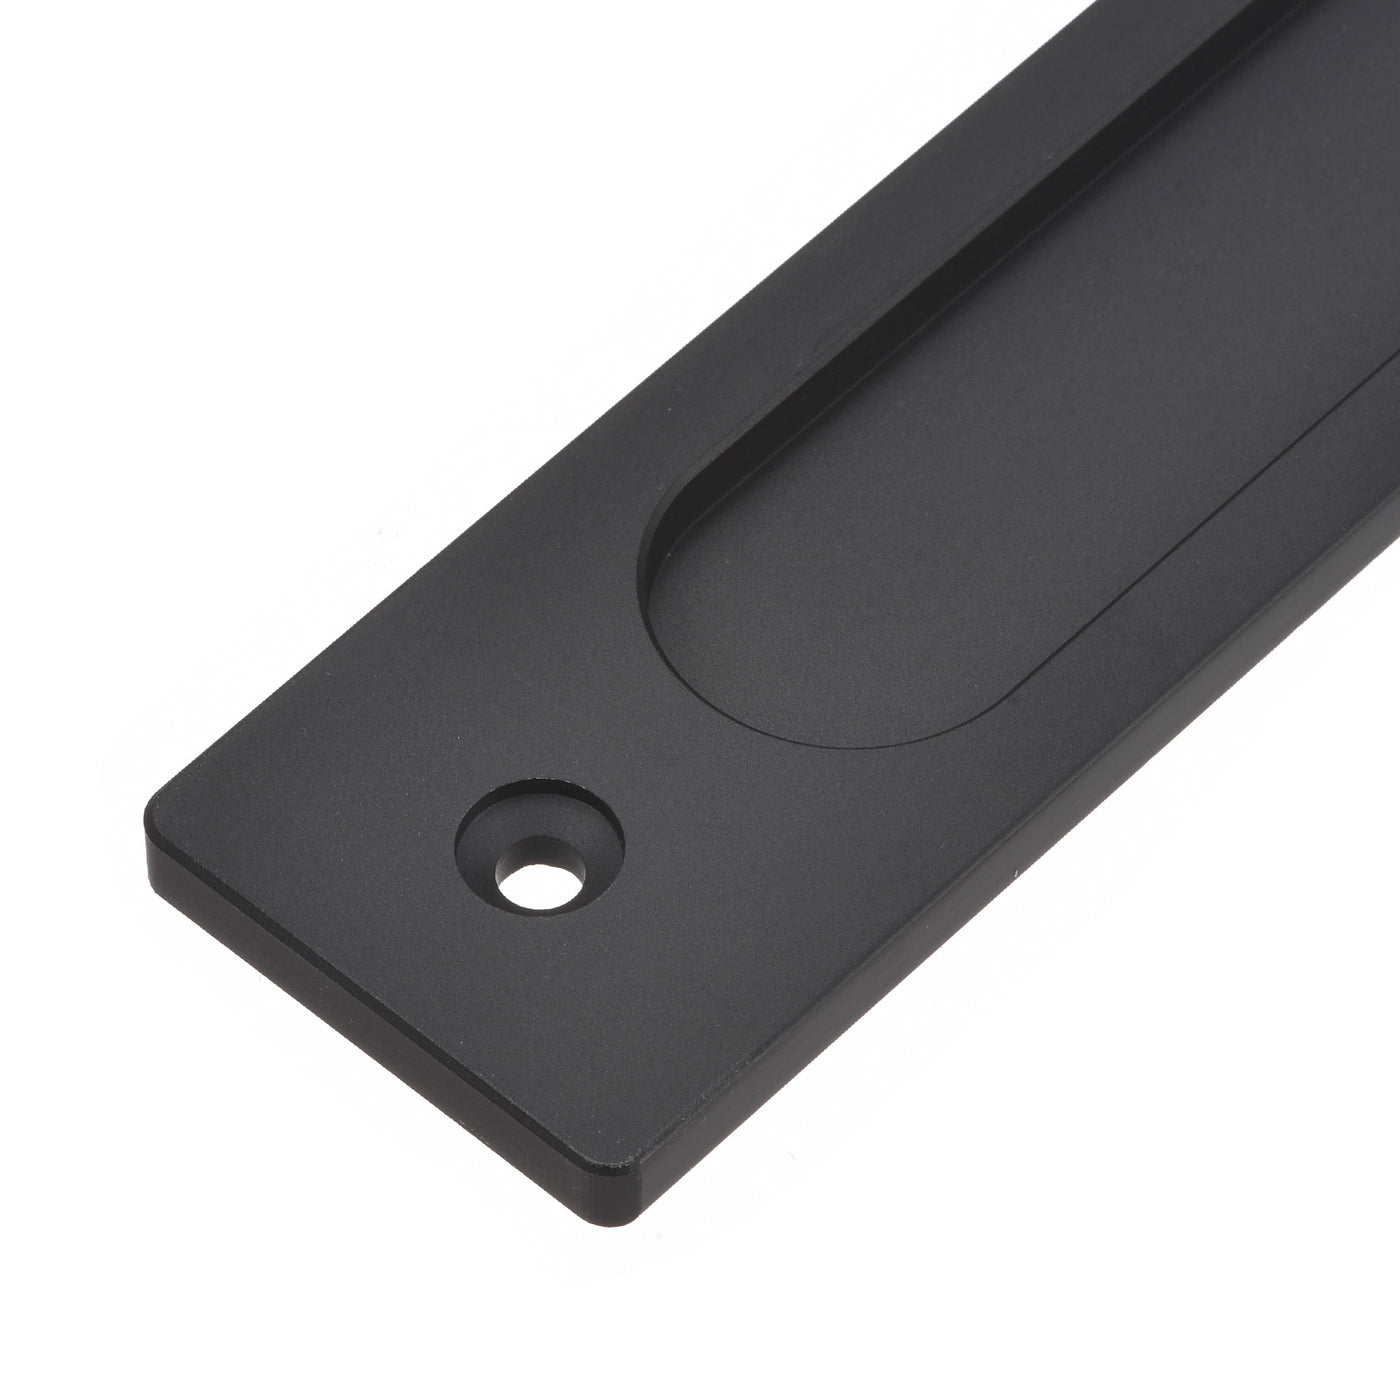 uxcell Uxcell Finger Flush Pull Handle 180x40x5.7mm Rectangle for Drawer Door Black 2pcs